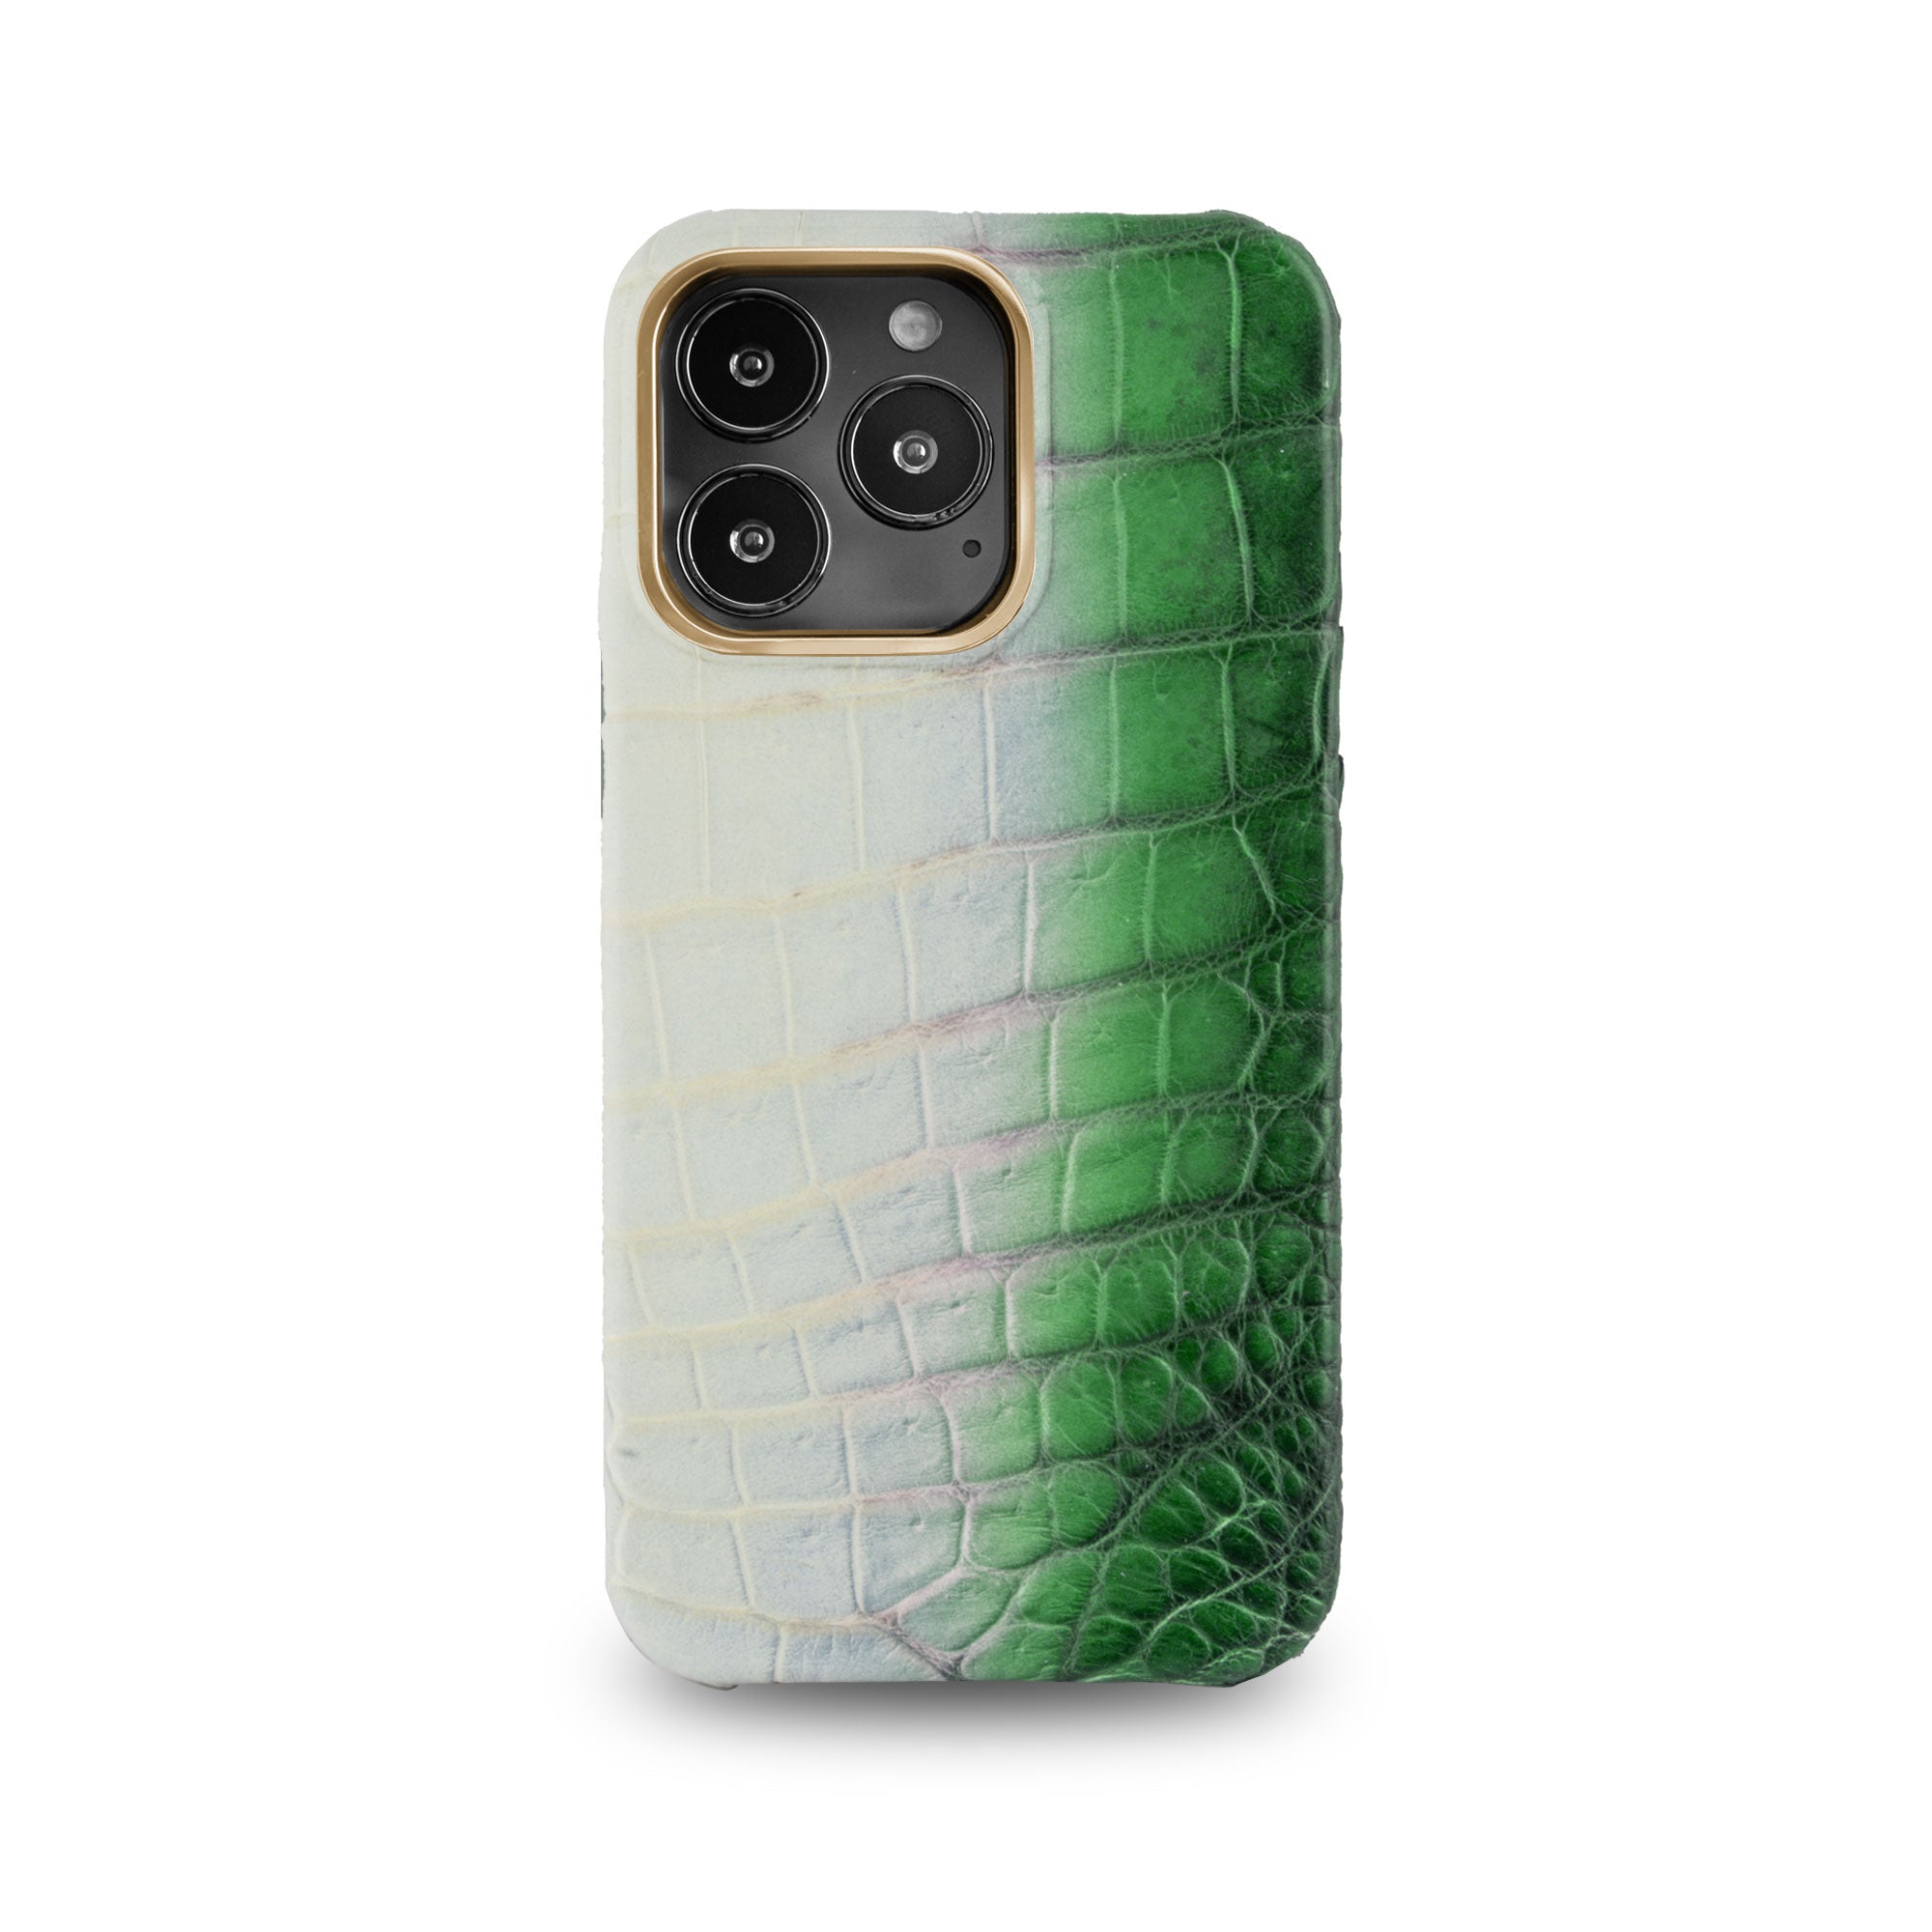 Leather iPhone HIMALAYA case / cover - iPhone 13 ( Pro / Max ) - Genuine alligator